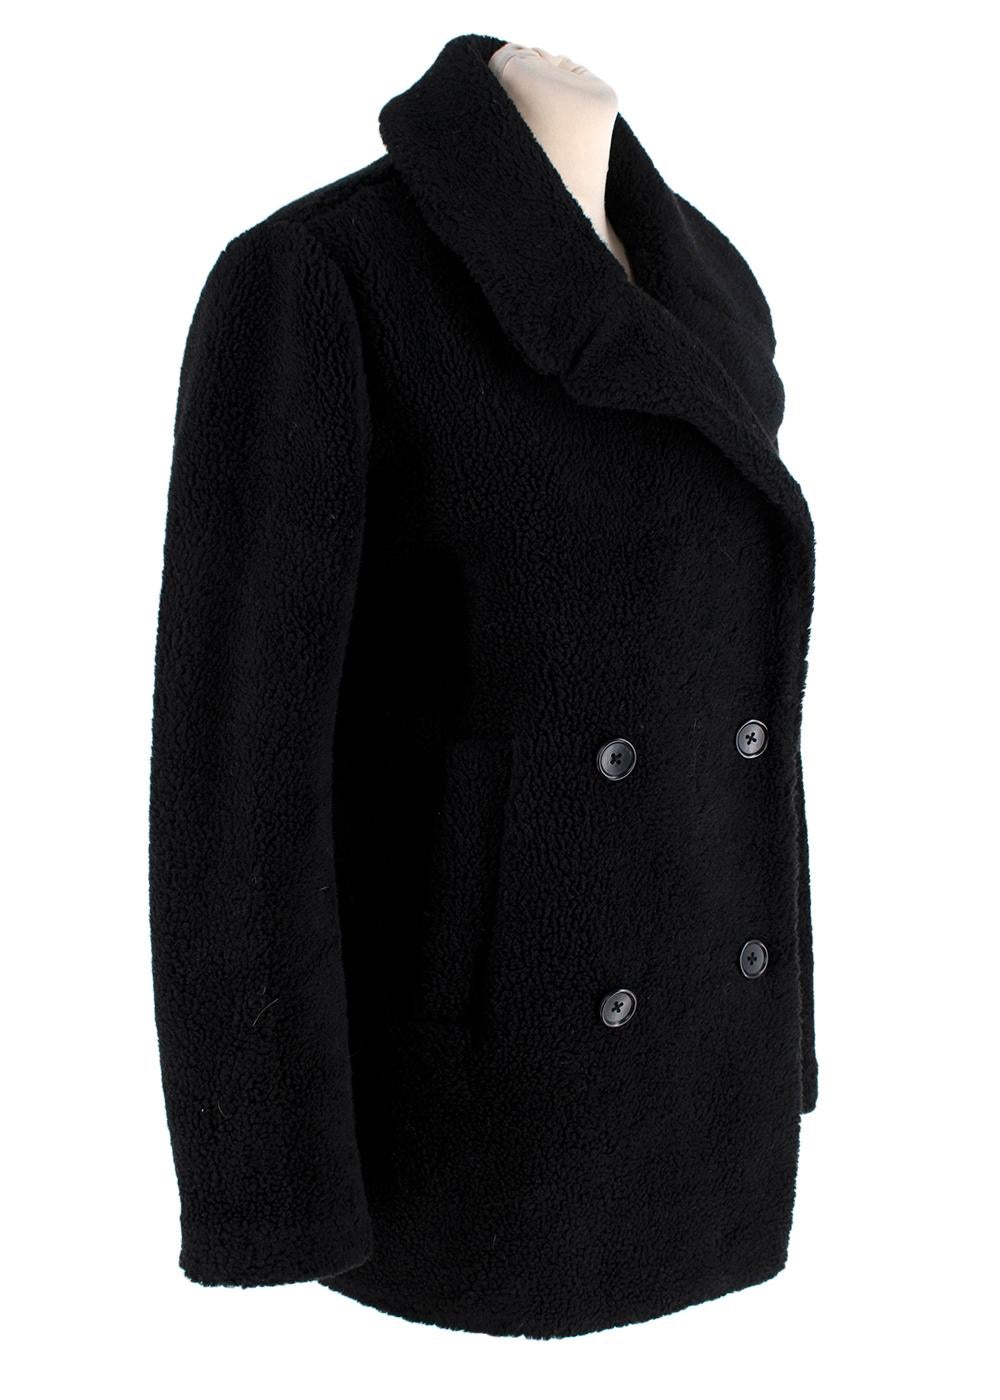 James Perse Sherpa Black Double Breatsed Peacoat

- Synthethic sherpa coat in black
- Double layered traditional peacoat collar detail
- Double breasted centre front opening
- Front welt pockets
- Partially lined at front

Materials:
80%